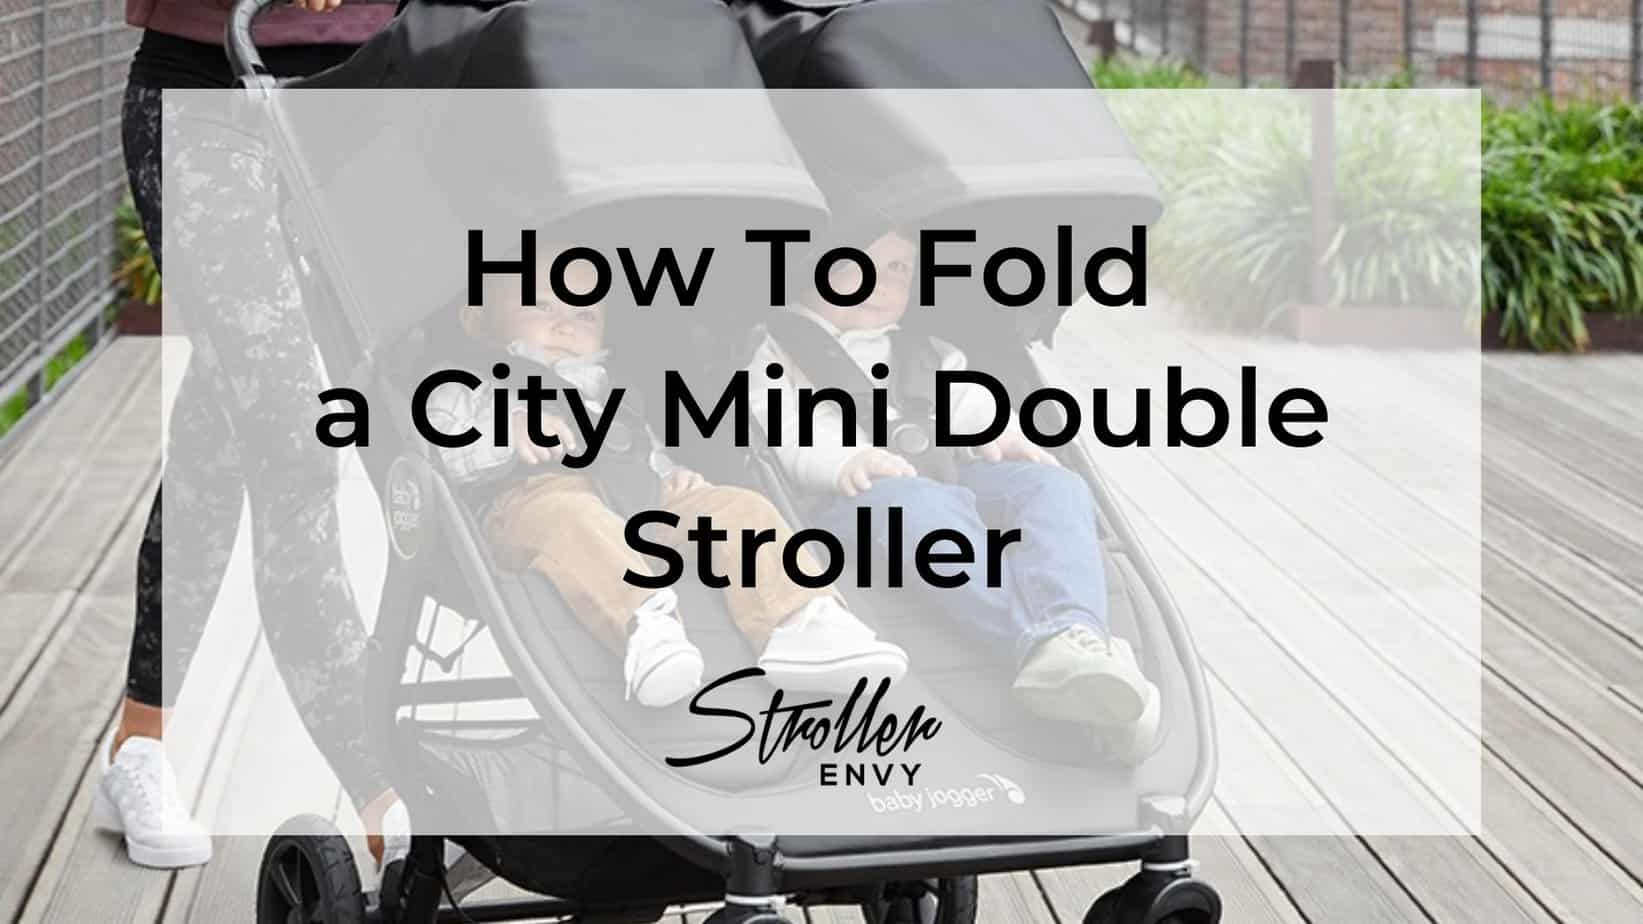 How To Fold a City Mini Double Stroller